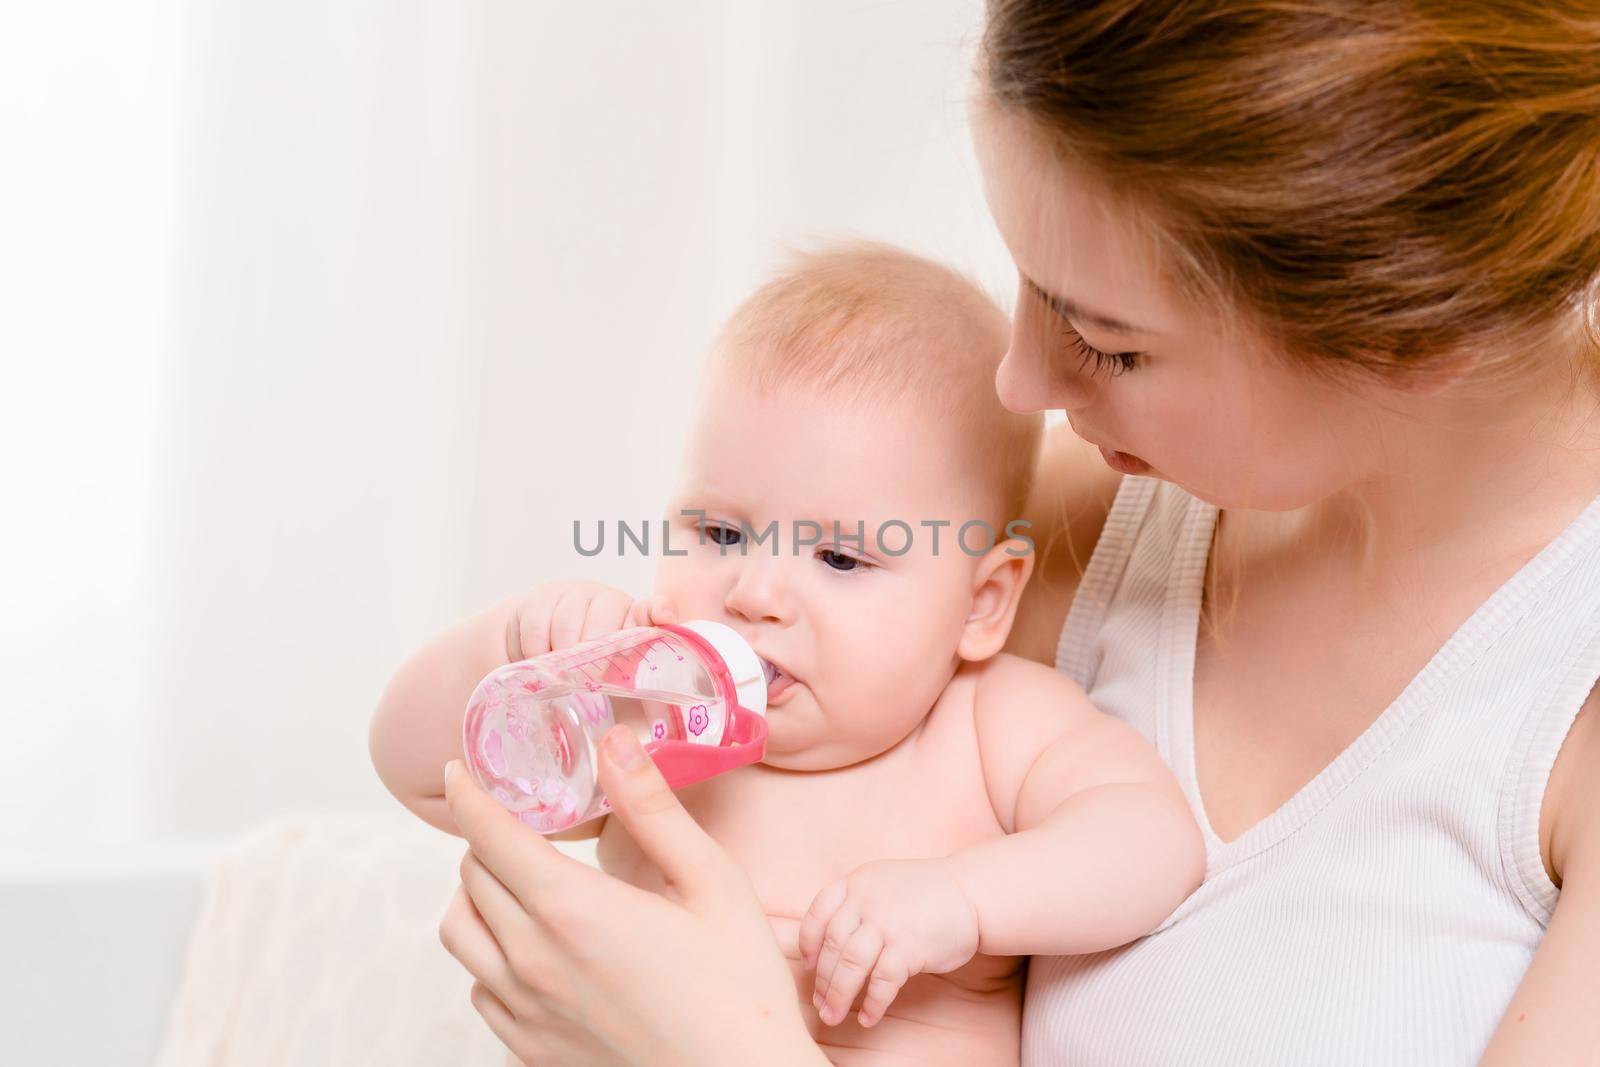 Feeding Baby. Baby eating milk from the bottle. Mother Feeds Her Newborn Baby